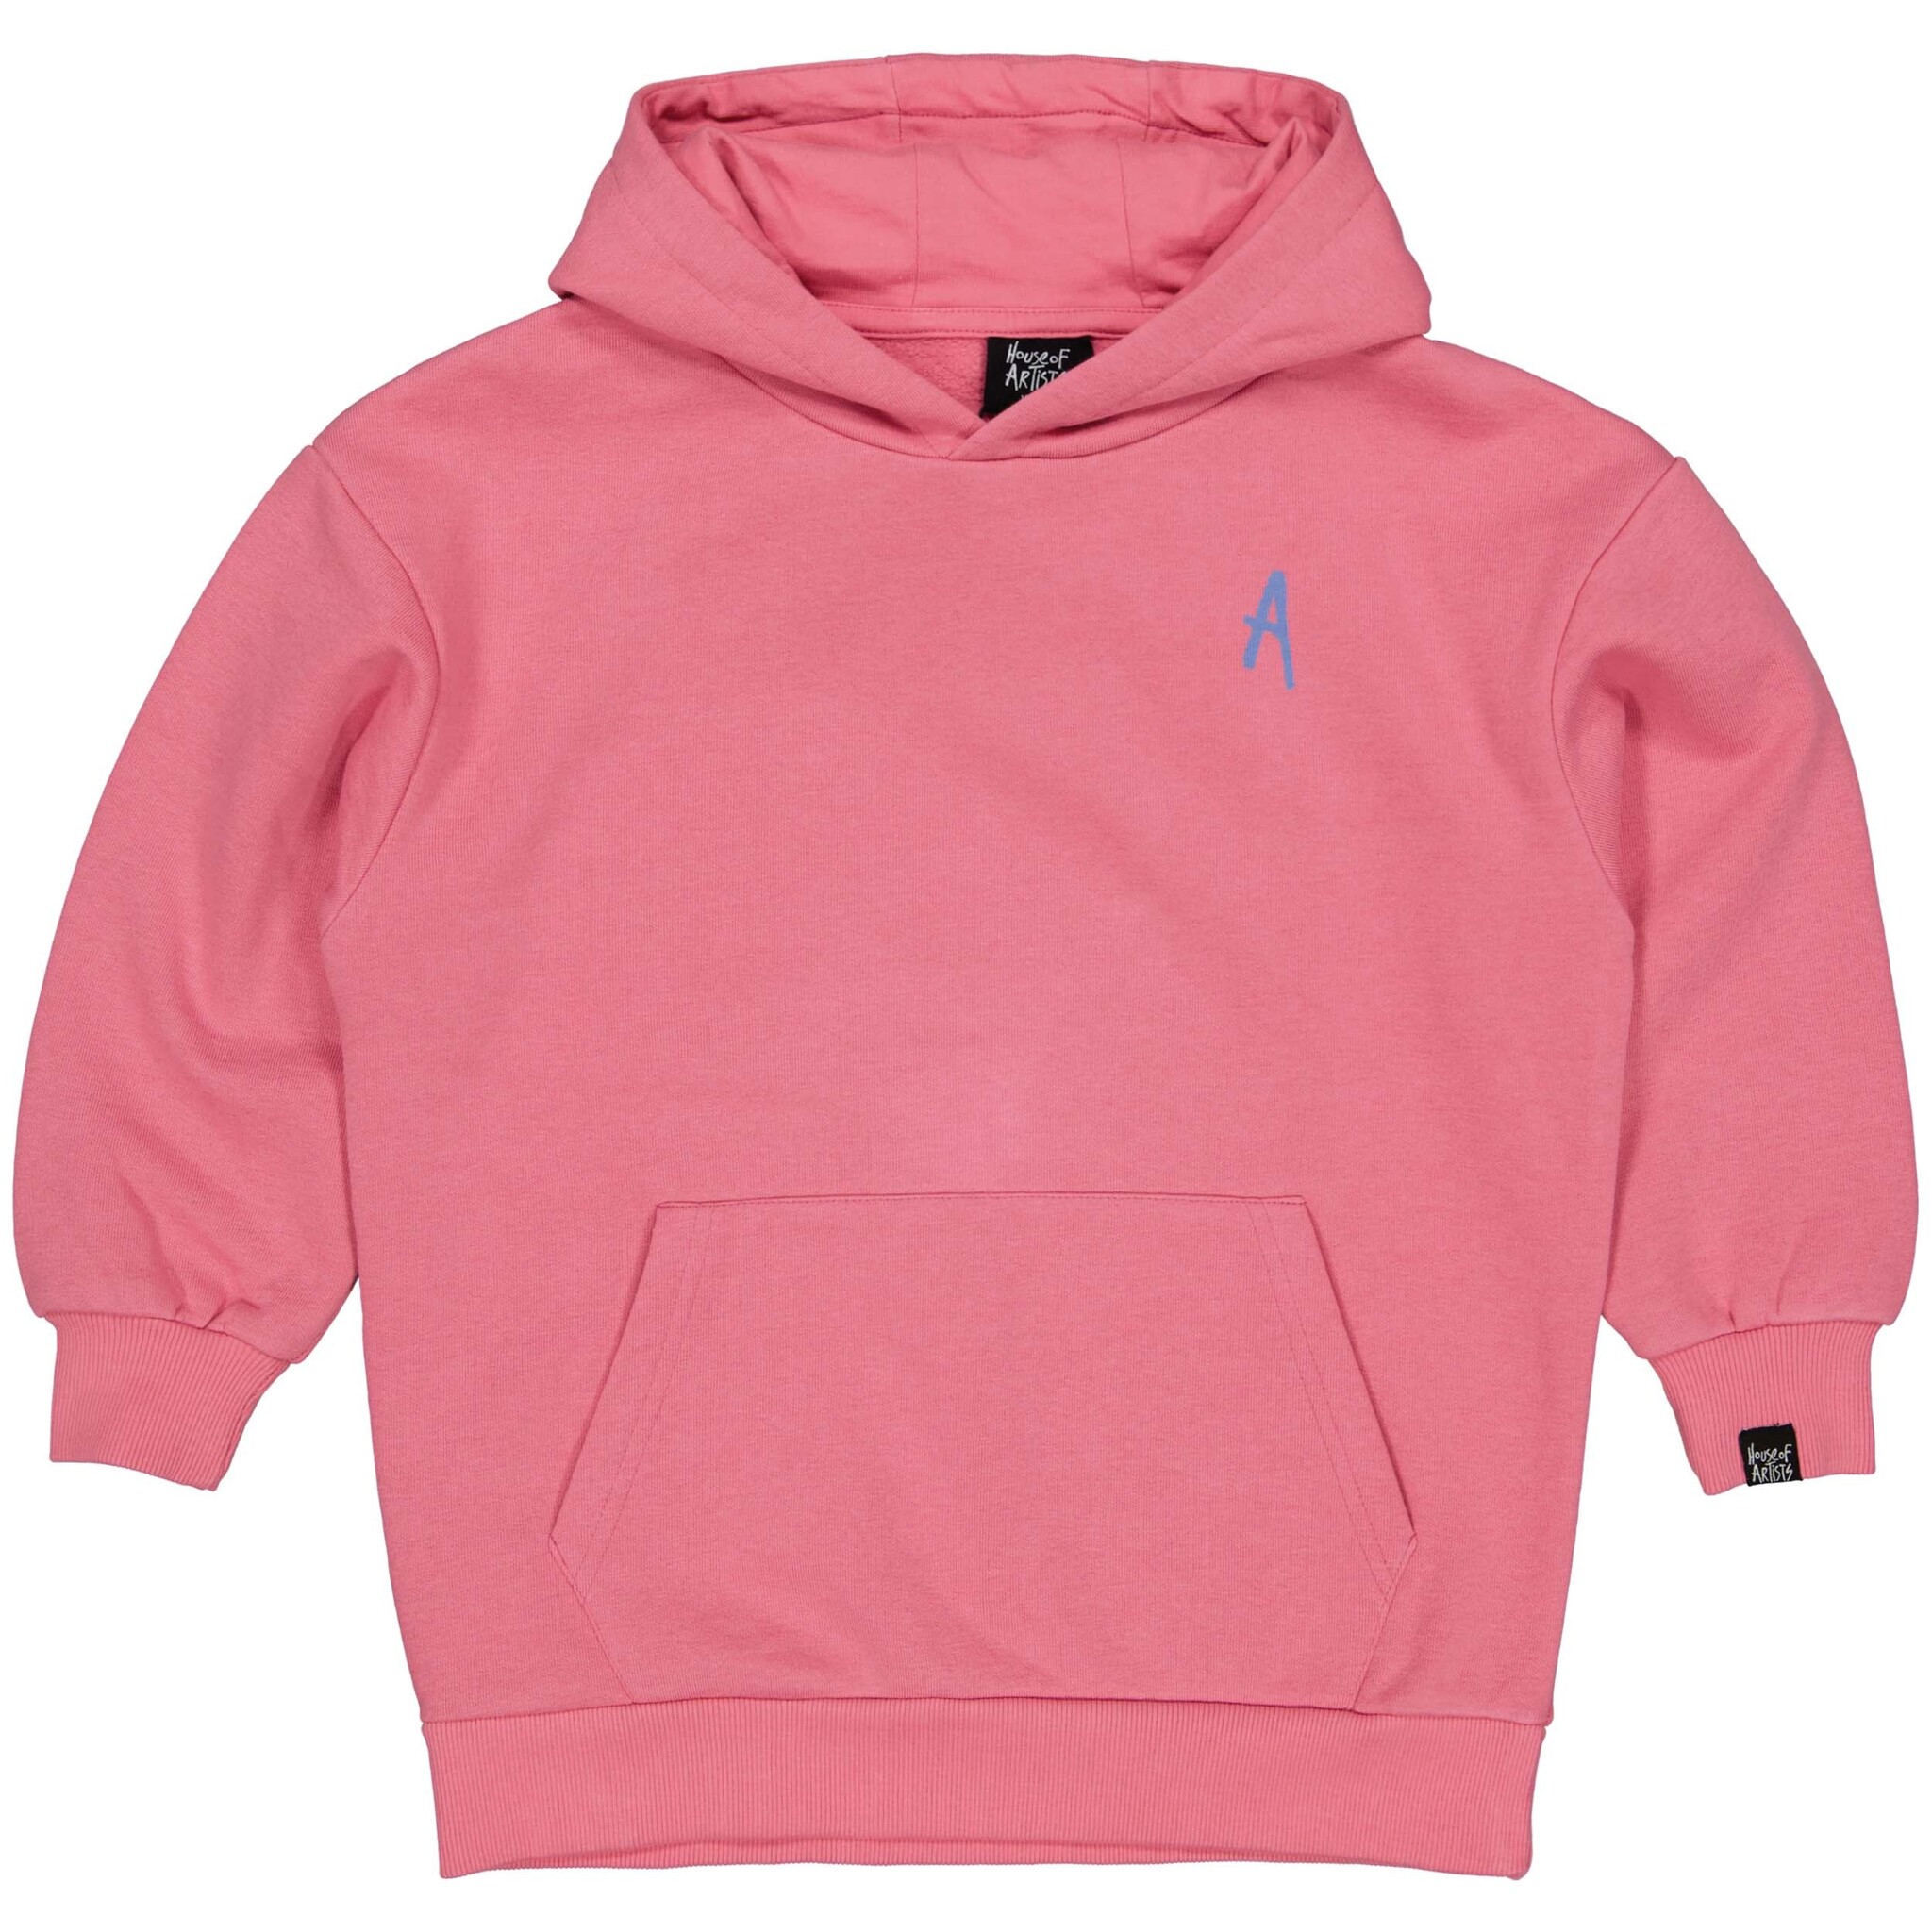 House of artists Hoodie - Roze